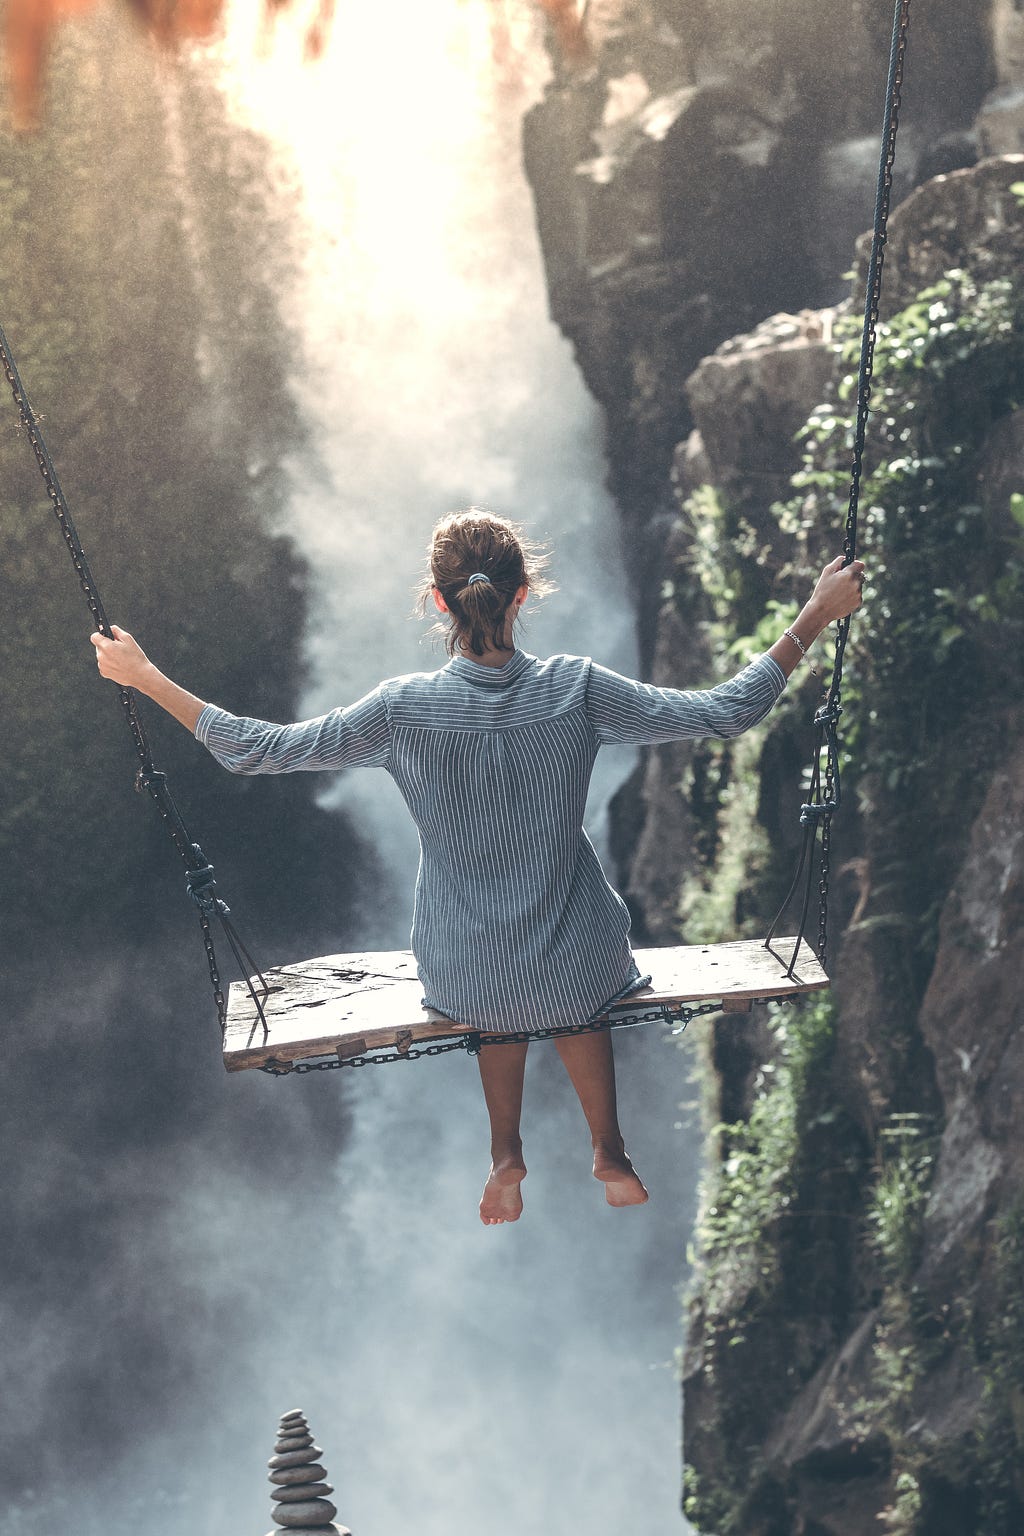 A picture of a lady on a swing swinging forward into a foggy narrow space between two steep cliffs. It signifies a jump into the unknown or murky waters but going anyway